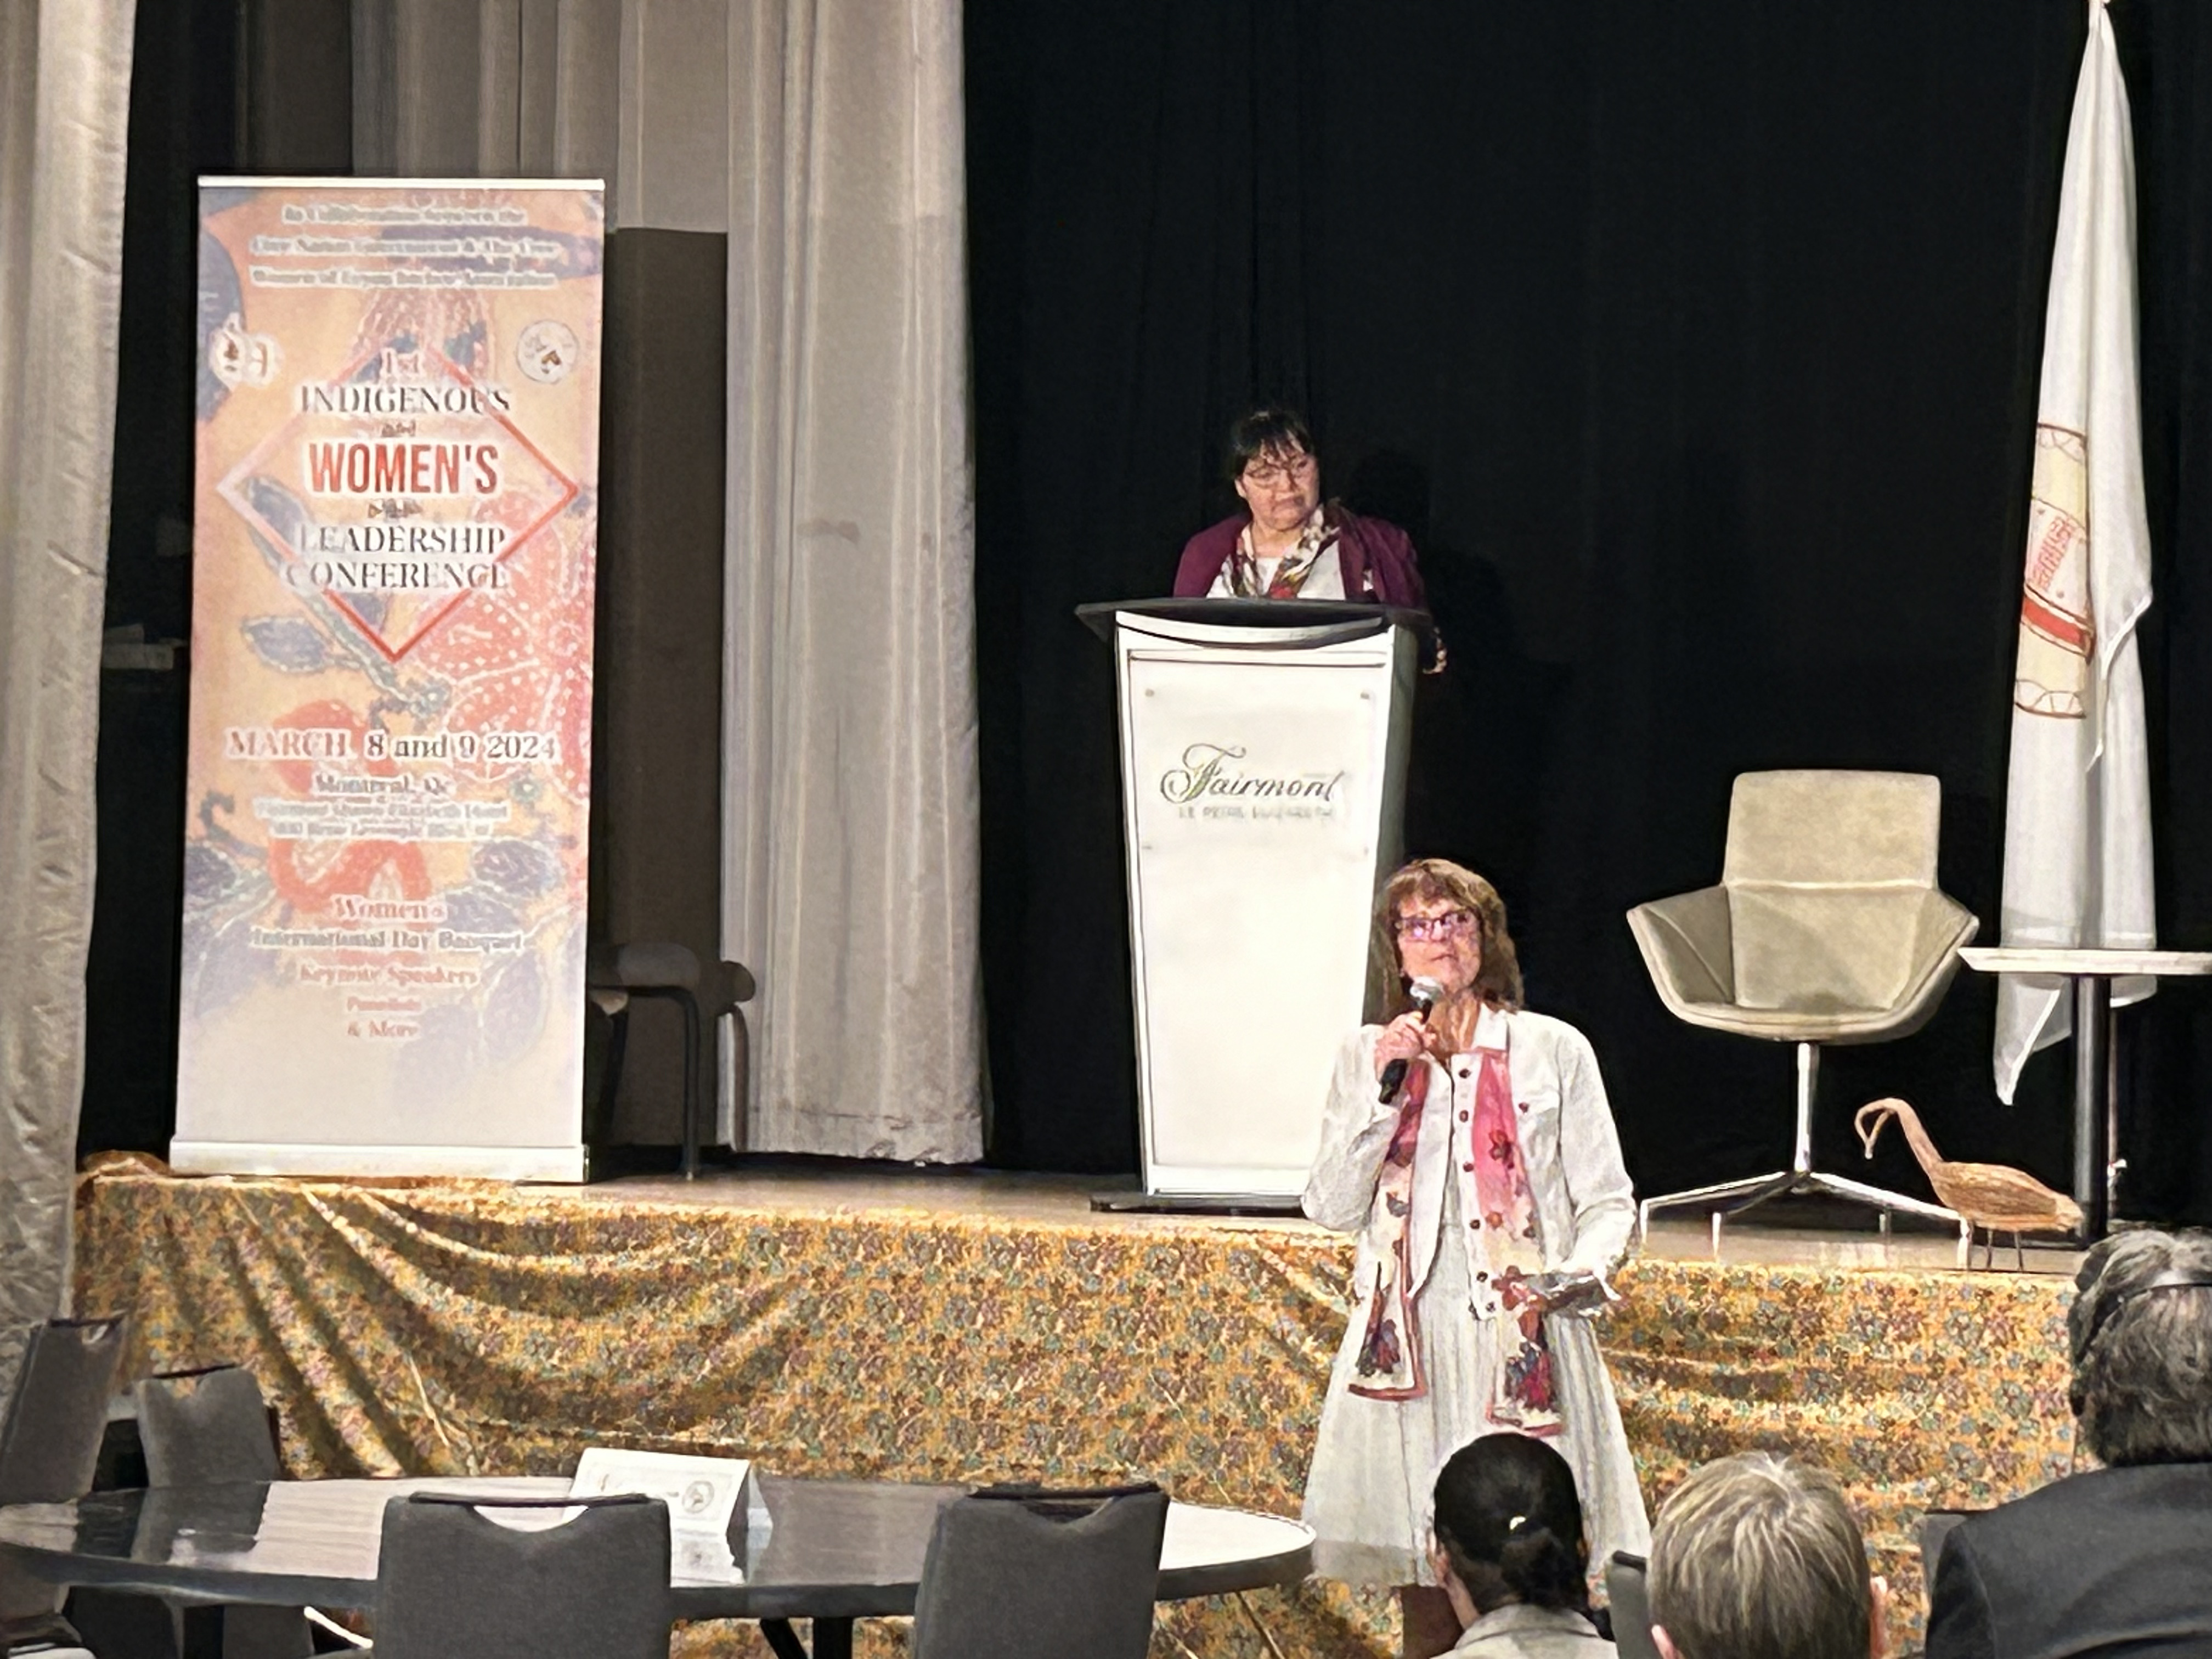 First conference on the leadership of indigenous women

